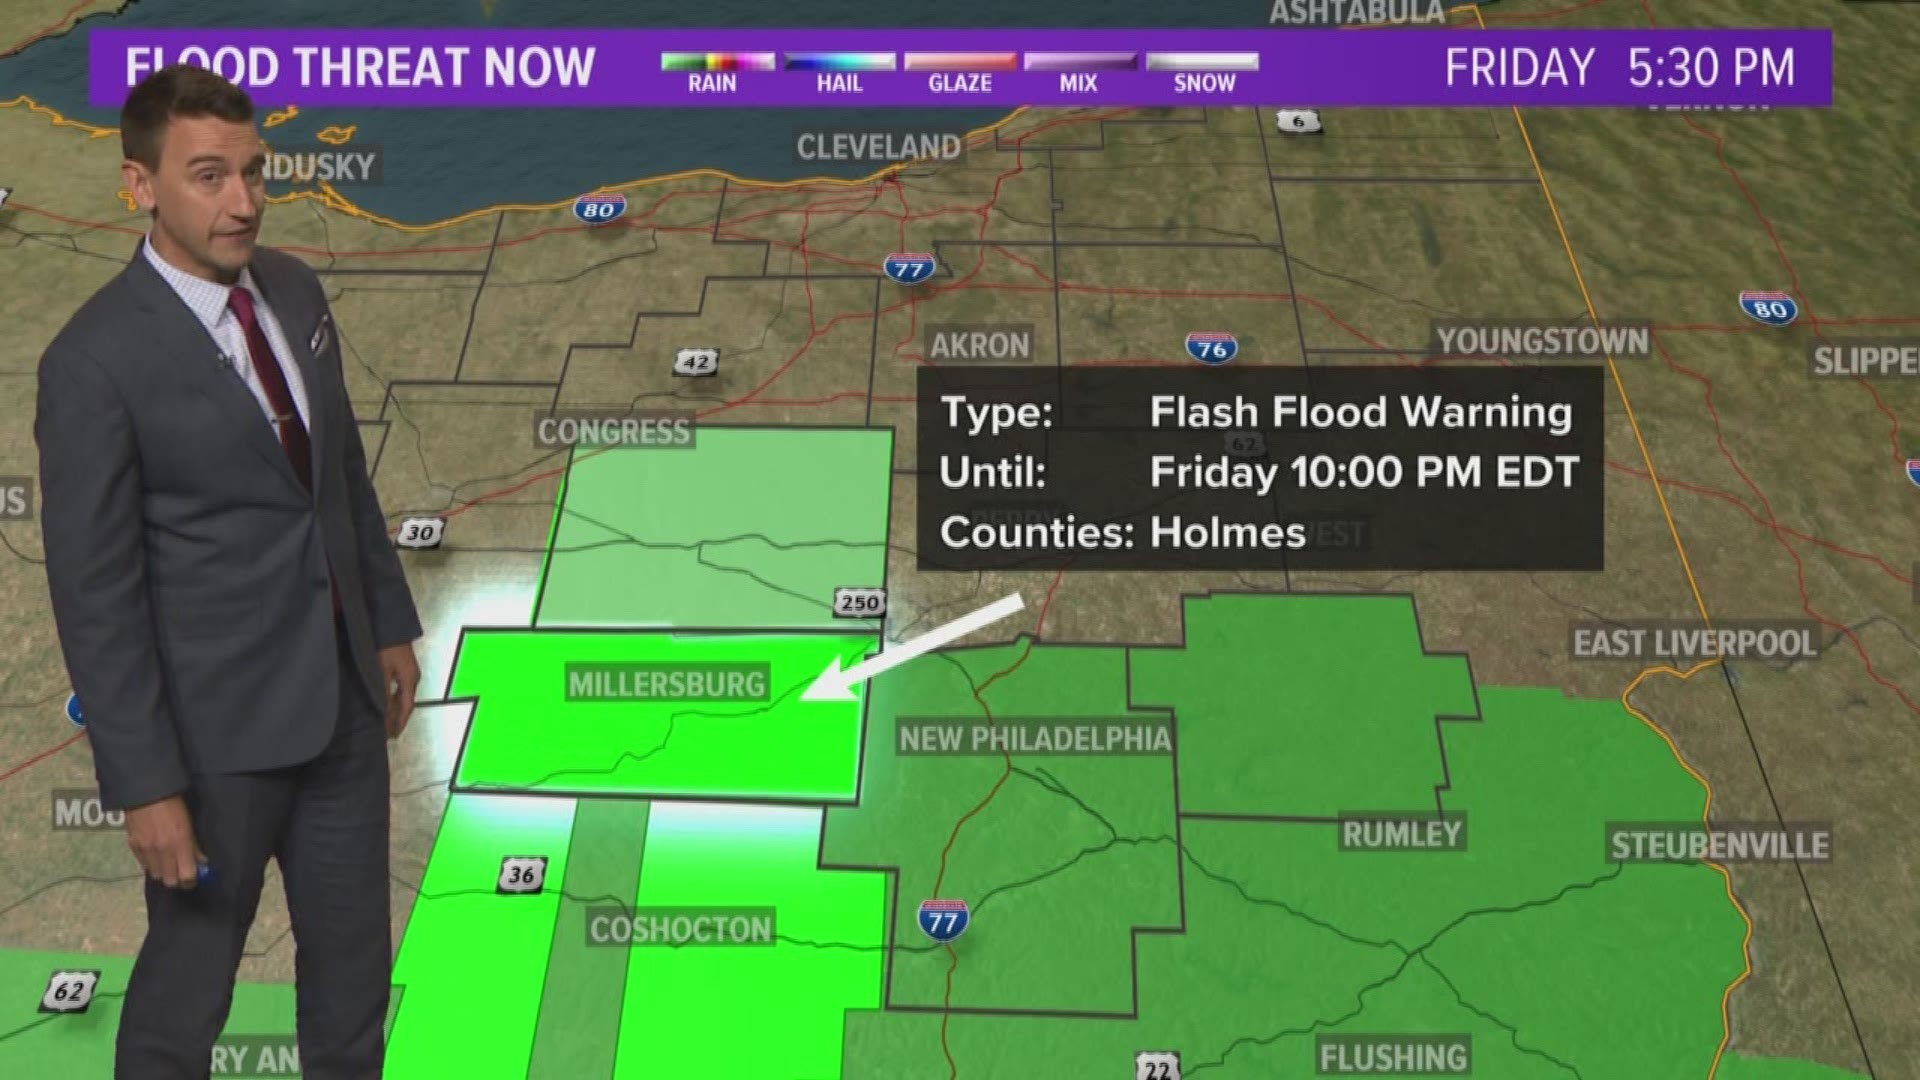 Flash Flood Warning issued for Holmes County